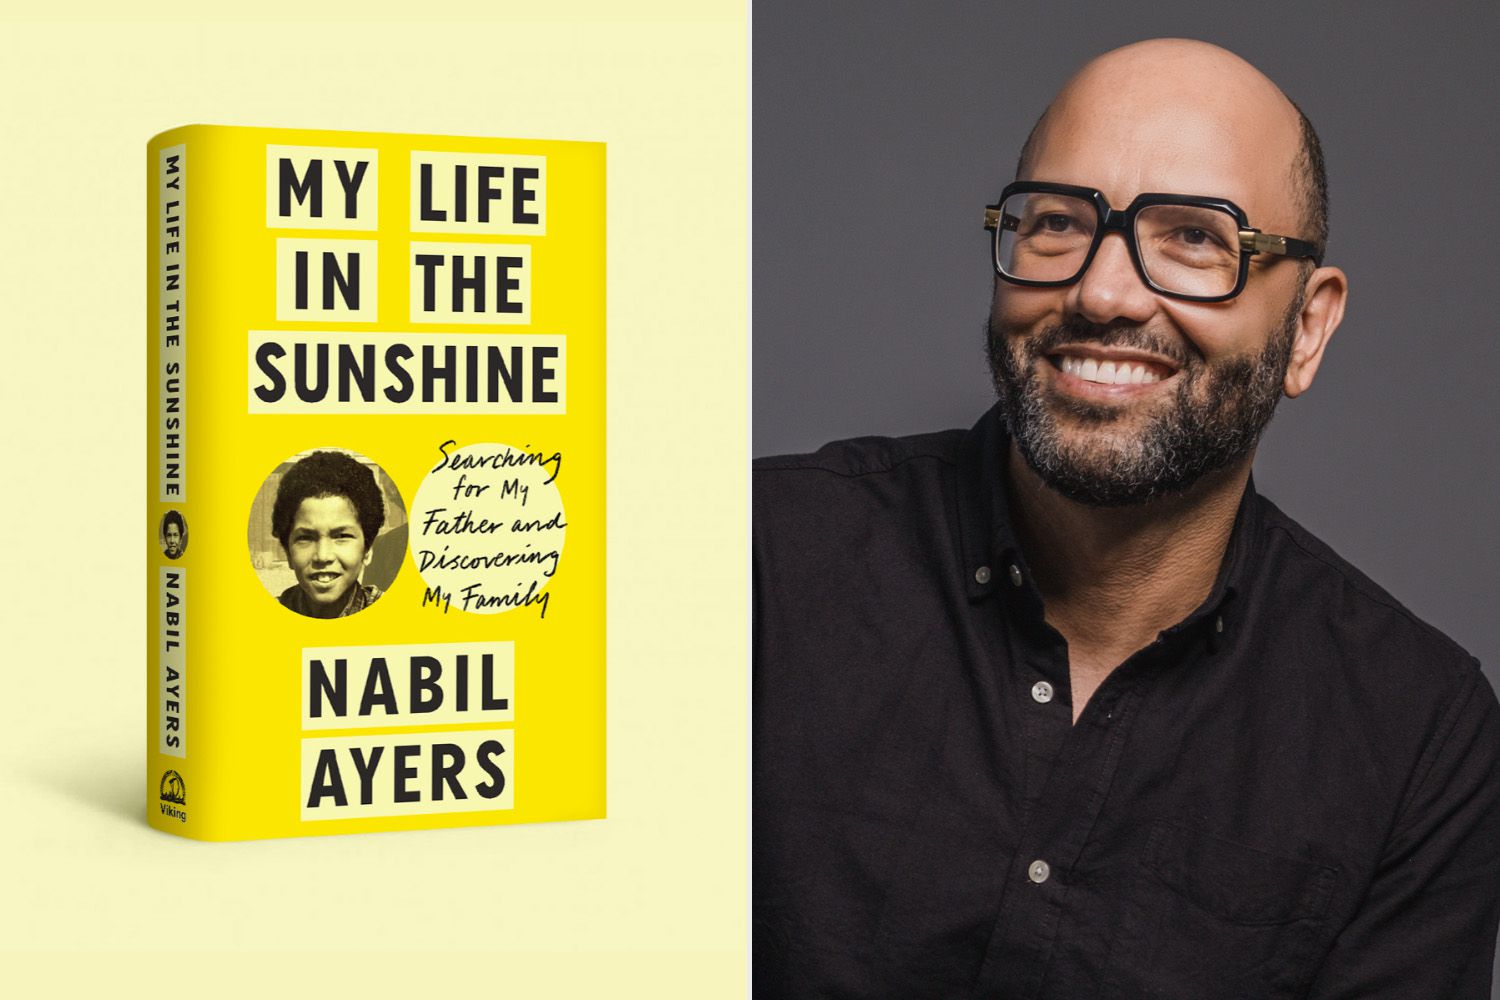 My Life in the Sunshine: Searching for My Father and Discovering My Family by Nabil Ayers